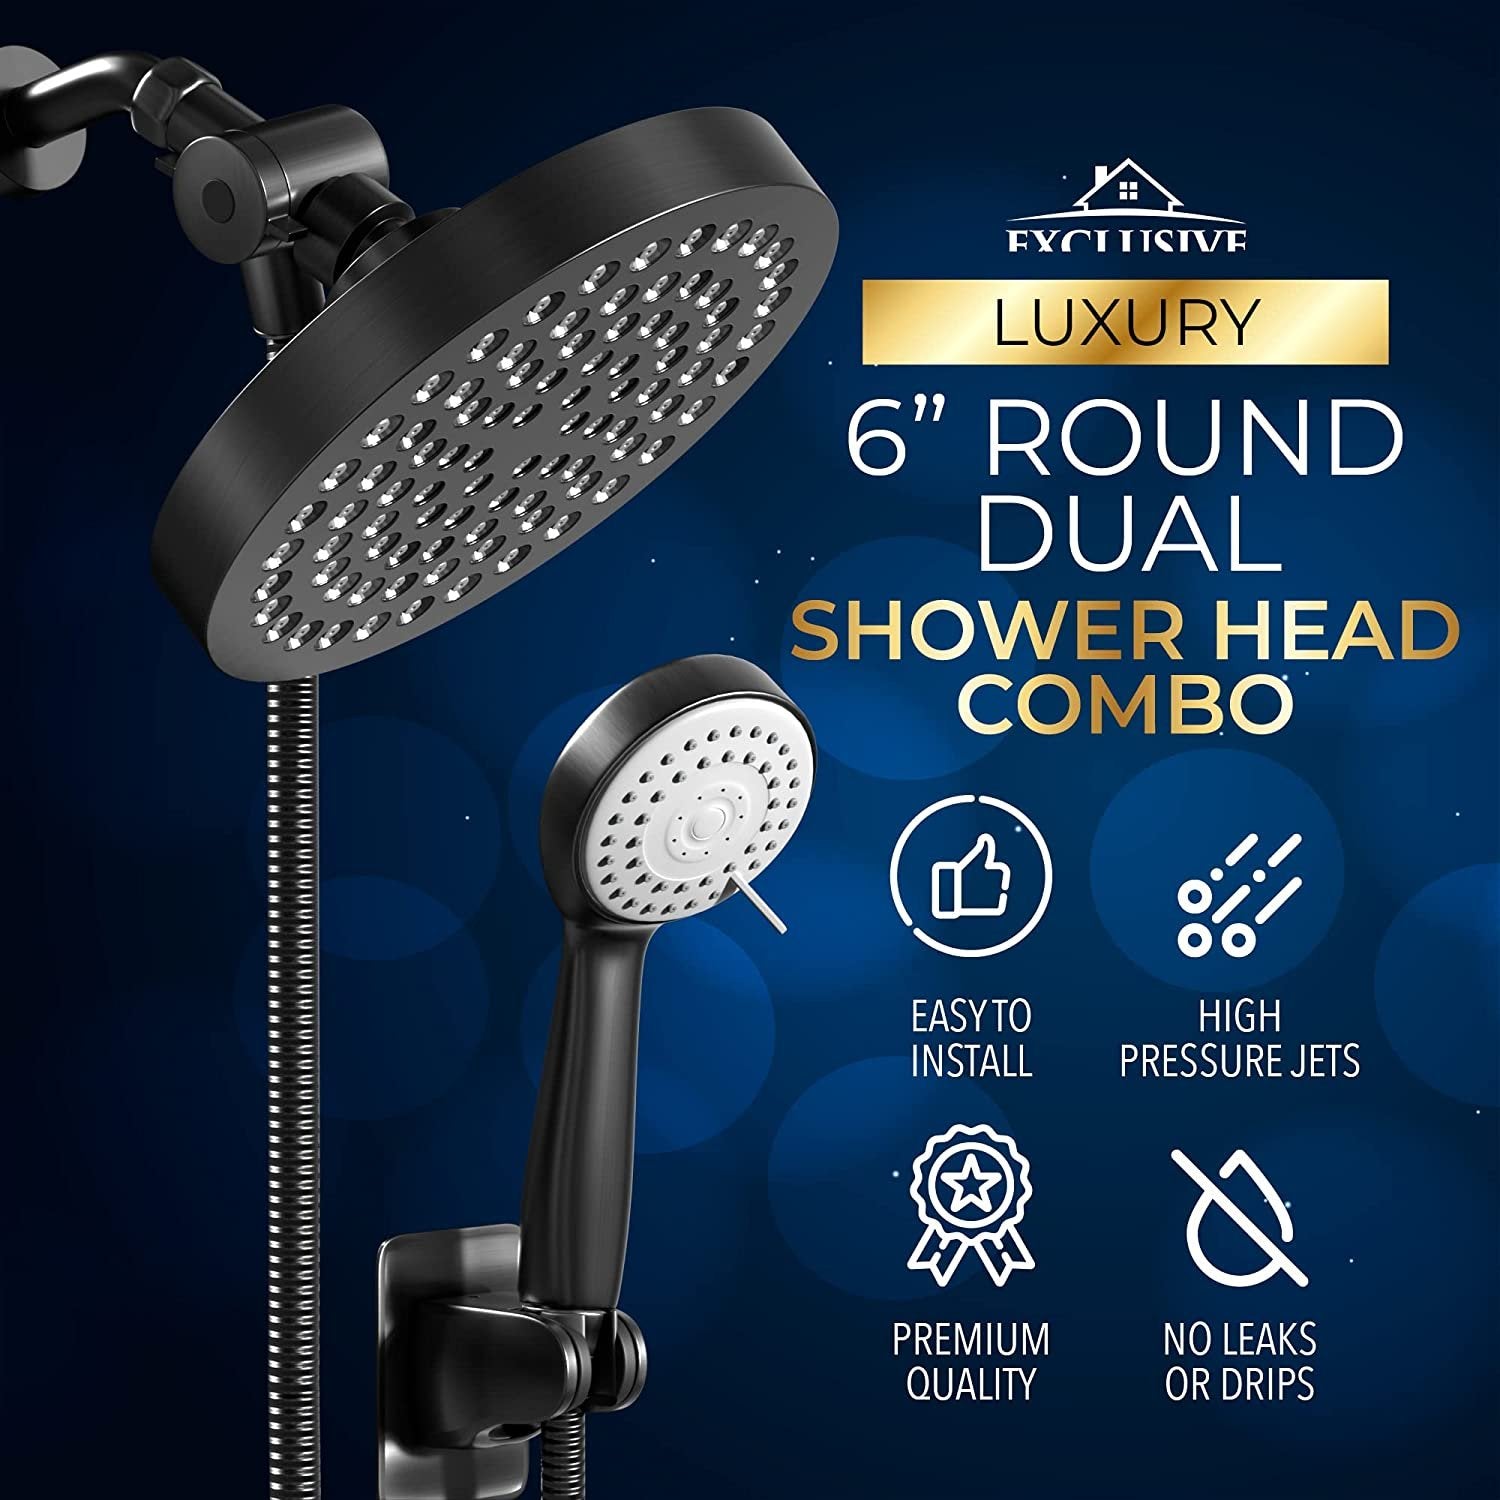 High Pressure Rainfall Shower Head and Hand Held Shower Head Combo with 70 Inch Hose for Bath and Adjustable Swivel Head - 2.5 GPM - Easy Install Anti Clog Jet Nozzles - Universal Fit for High